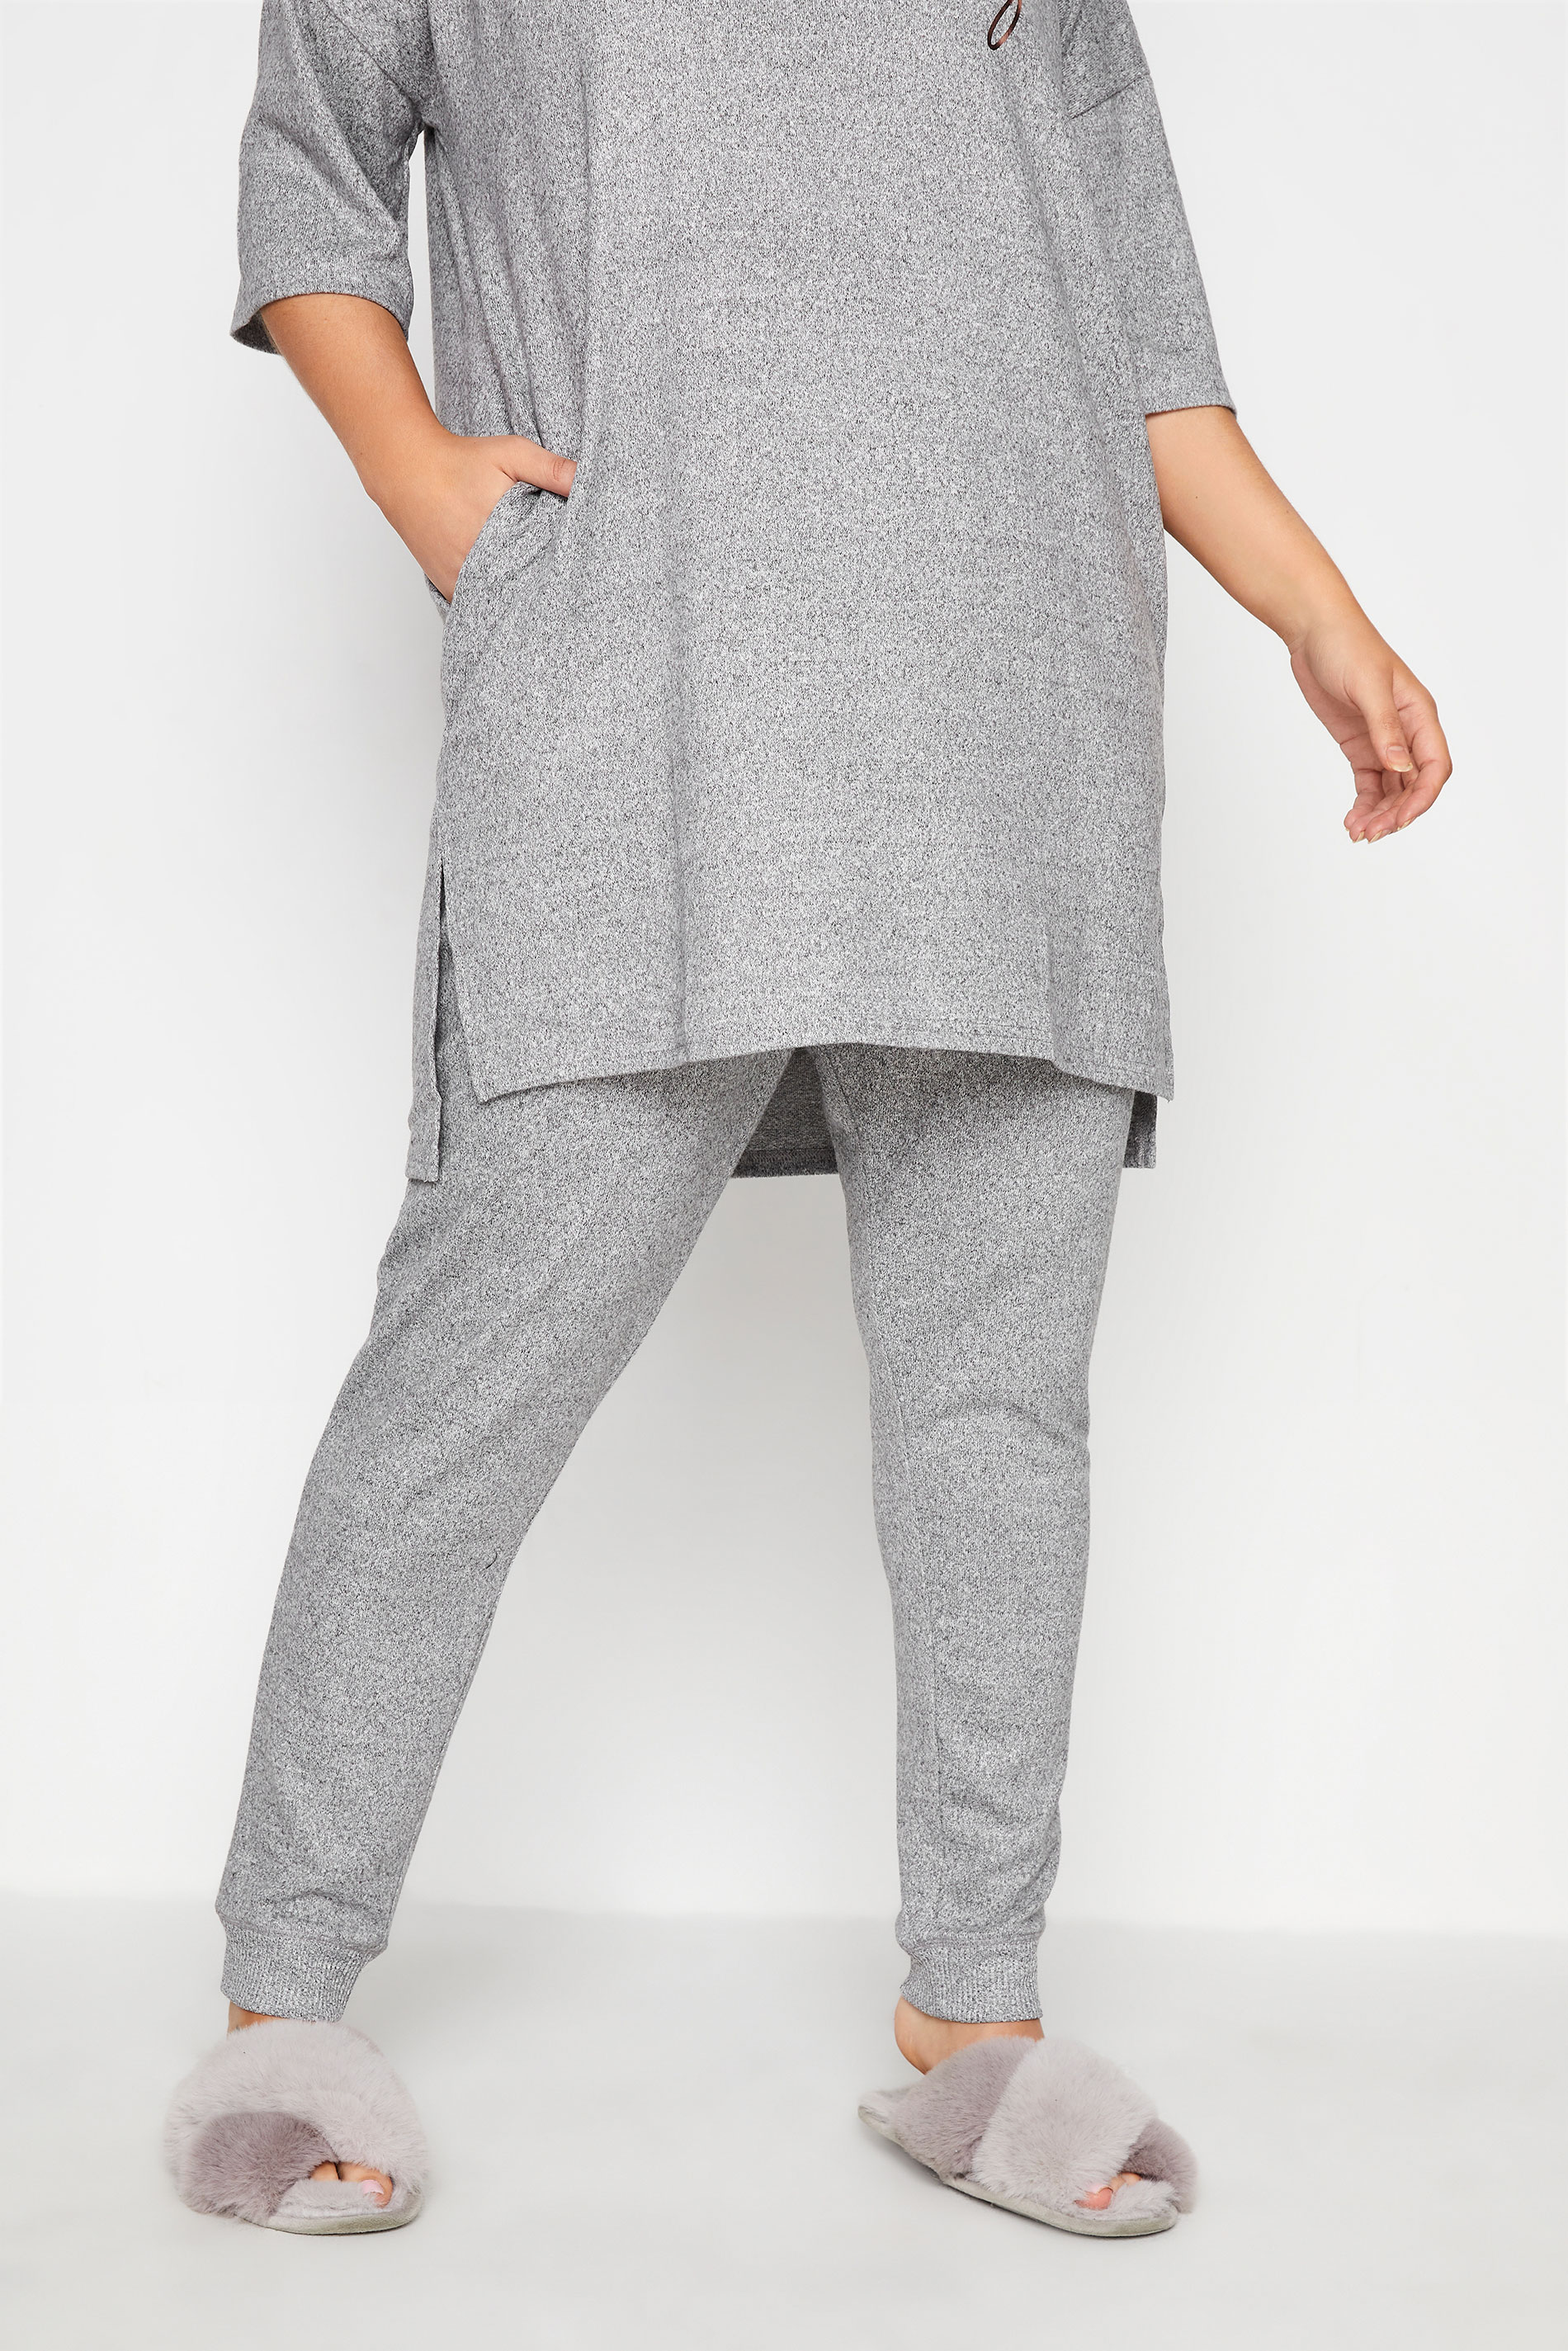 Grey Soft Touch Knitted Lounge Pants_A.jpg